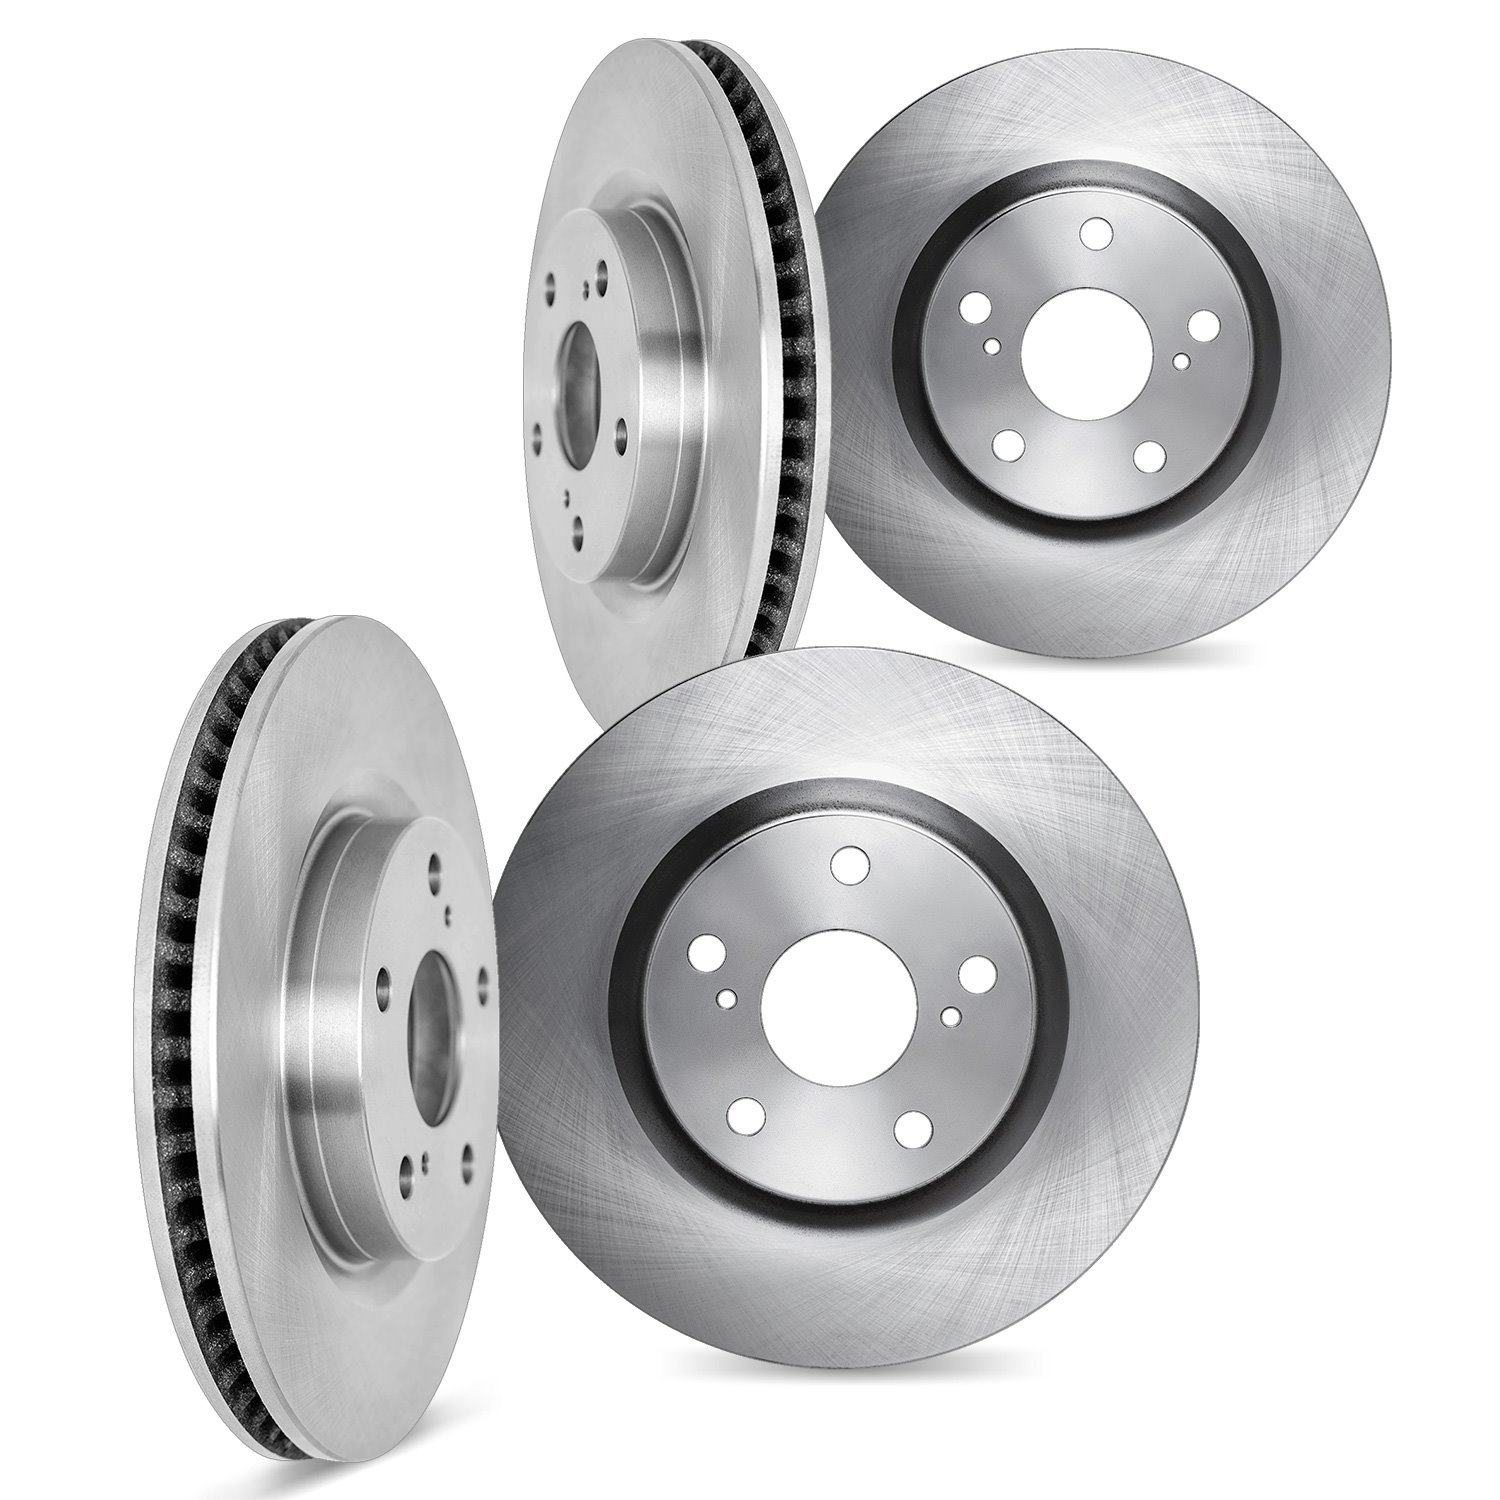 6004-26002 Brake Rotors, Fits Select Tesla, Position: Front and Rear